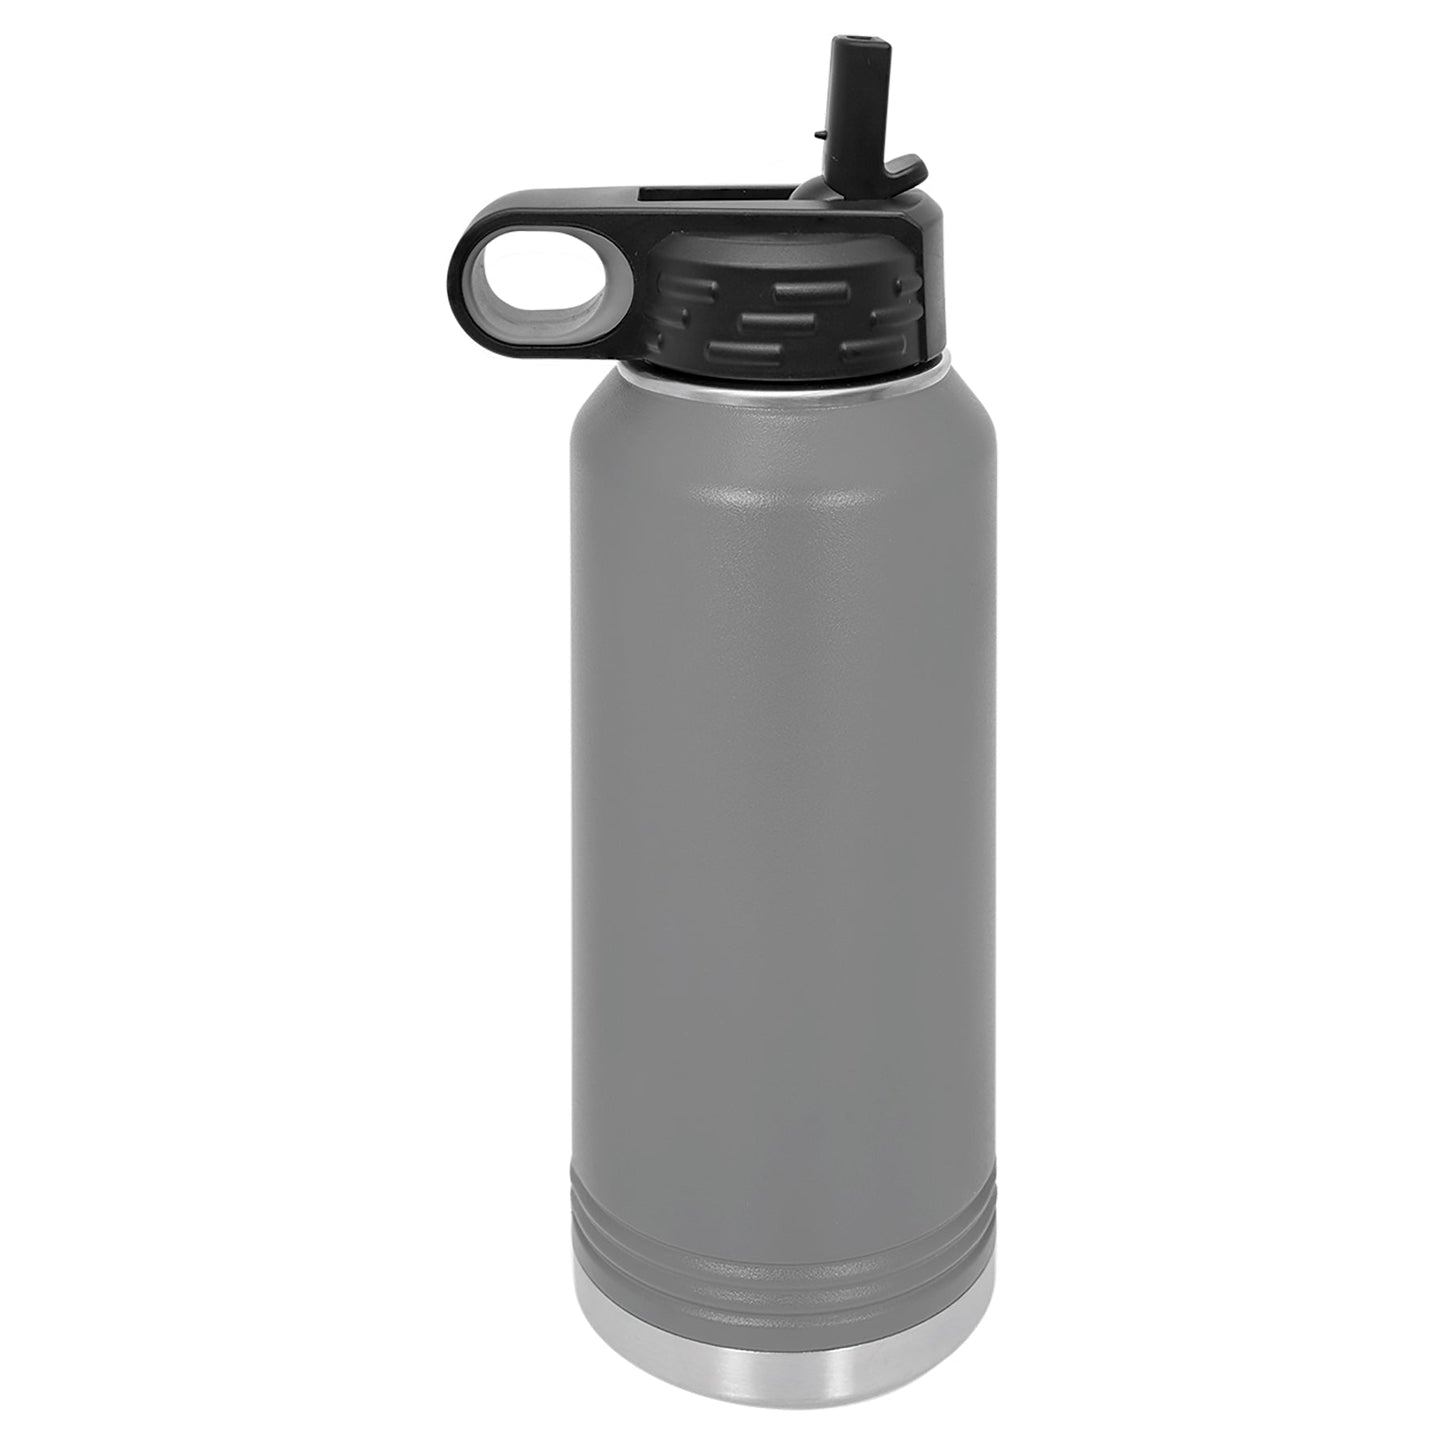 Mechanic / Auto Parts themed Stainless Water Bottle